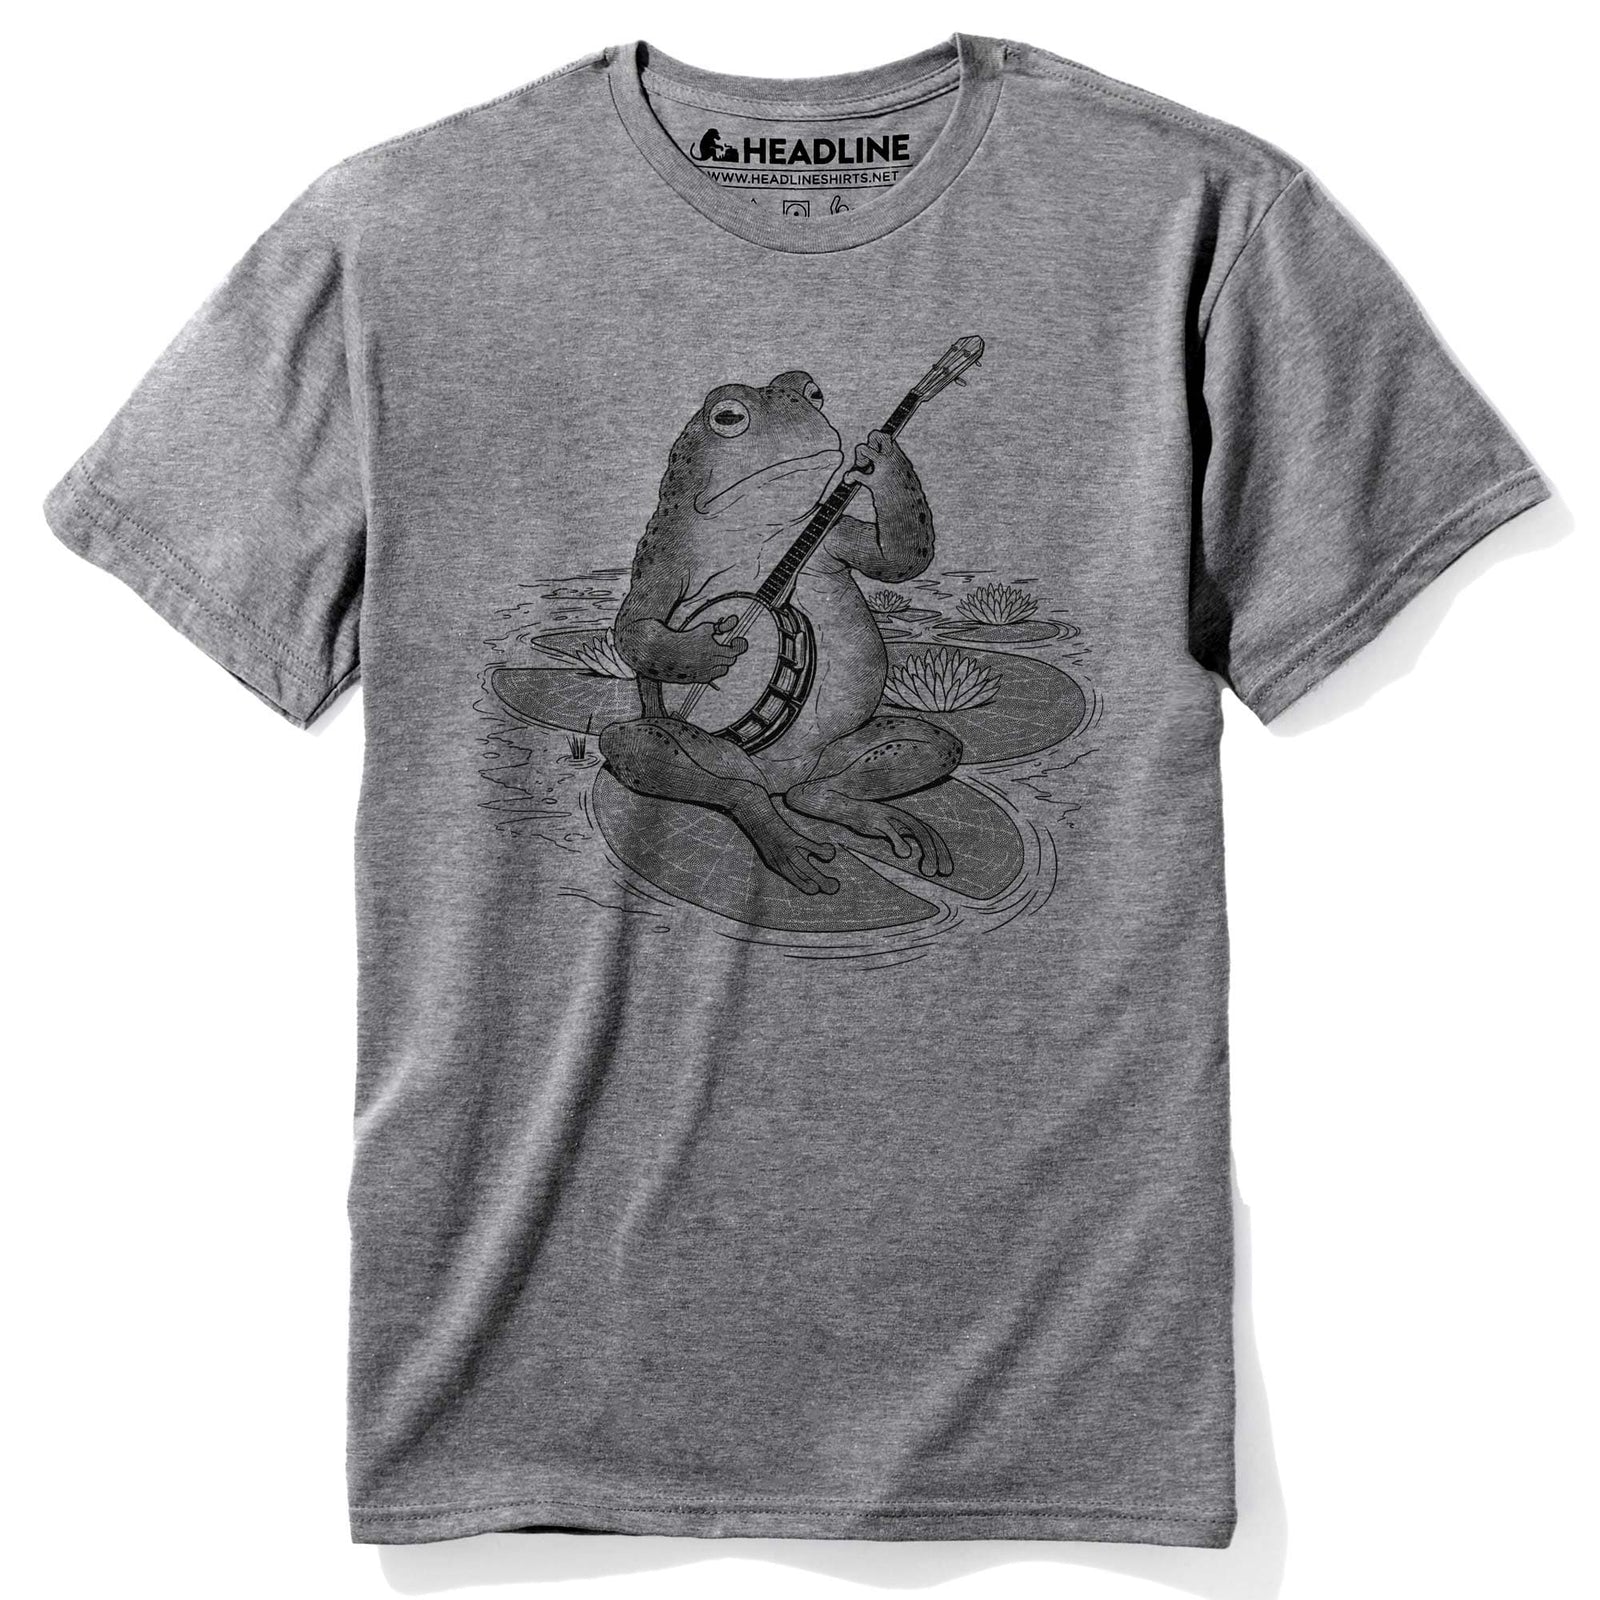 Men's Country Frog Designer Musician Graphic T-Shirt | Vintage Banjo Lilypad Tee | Solid Threads